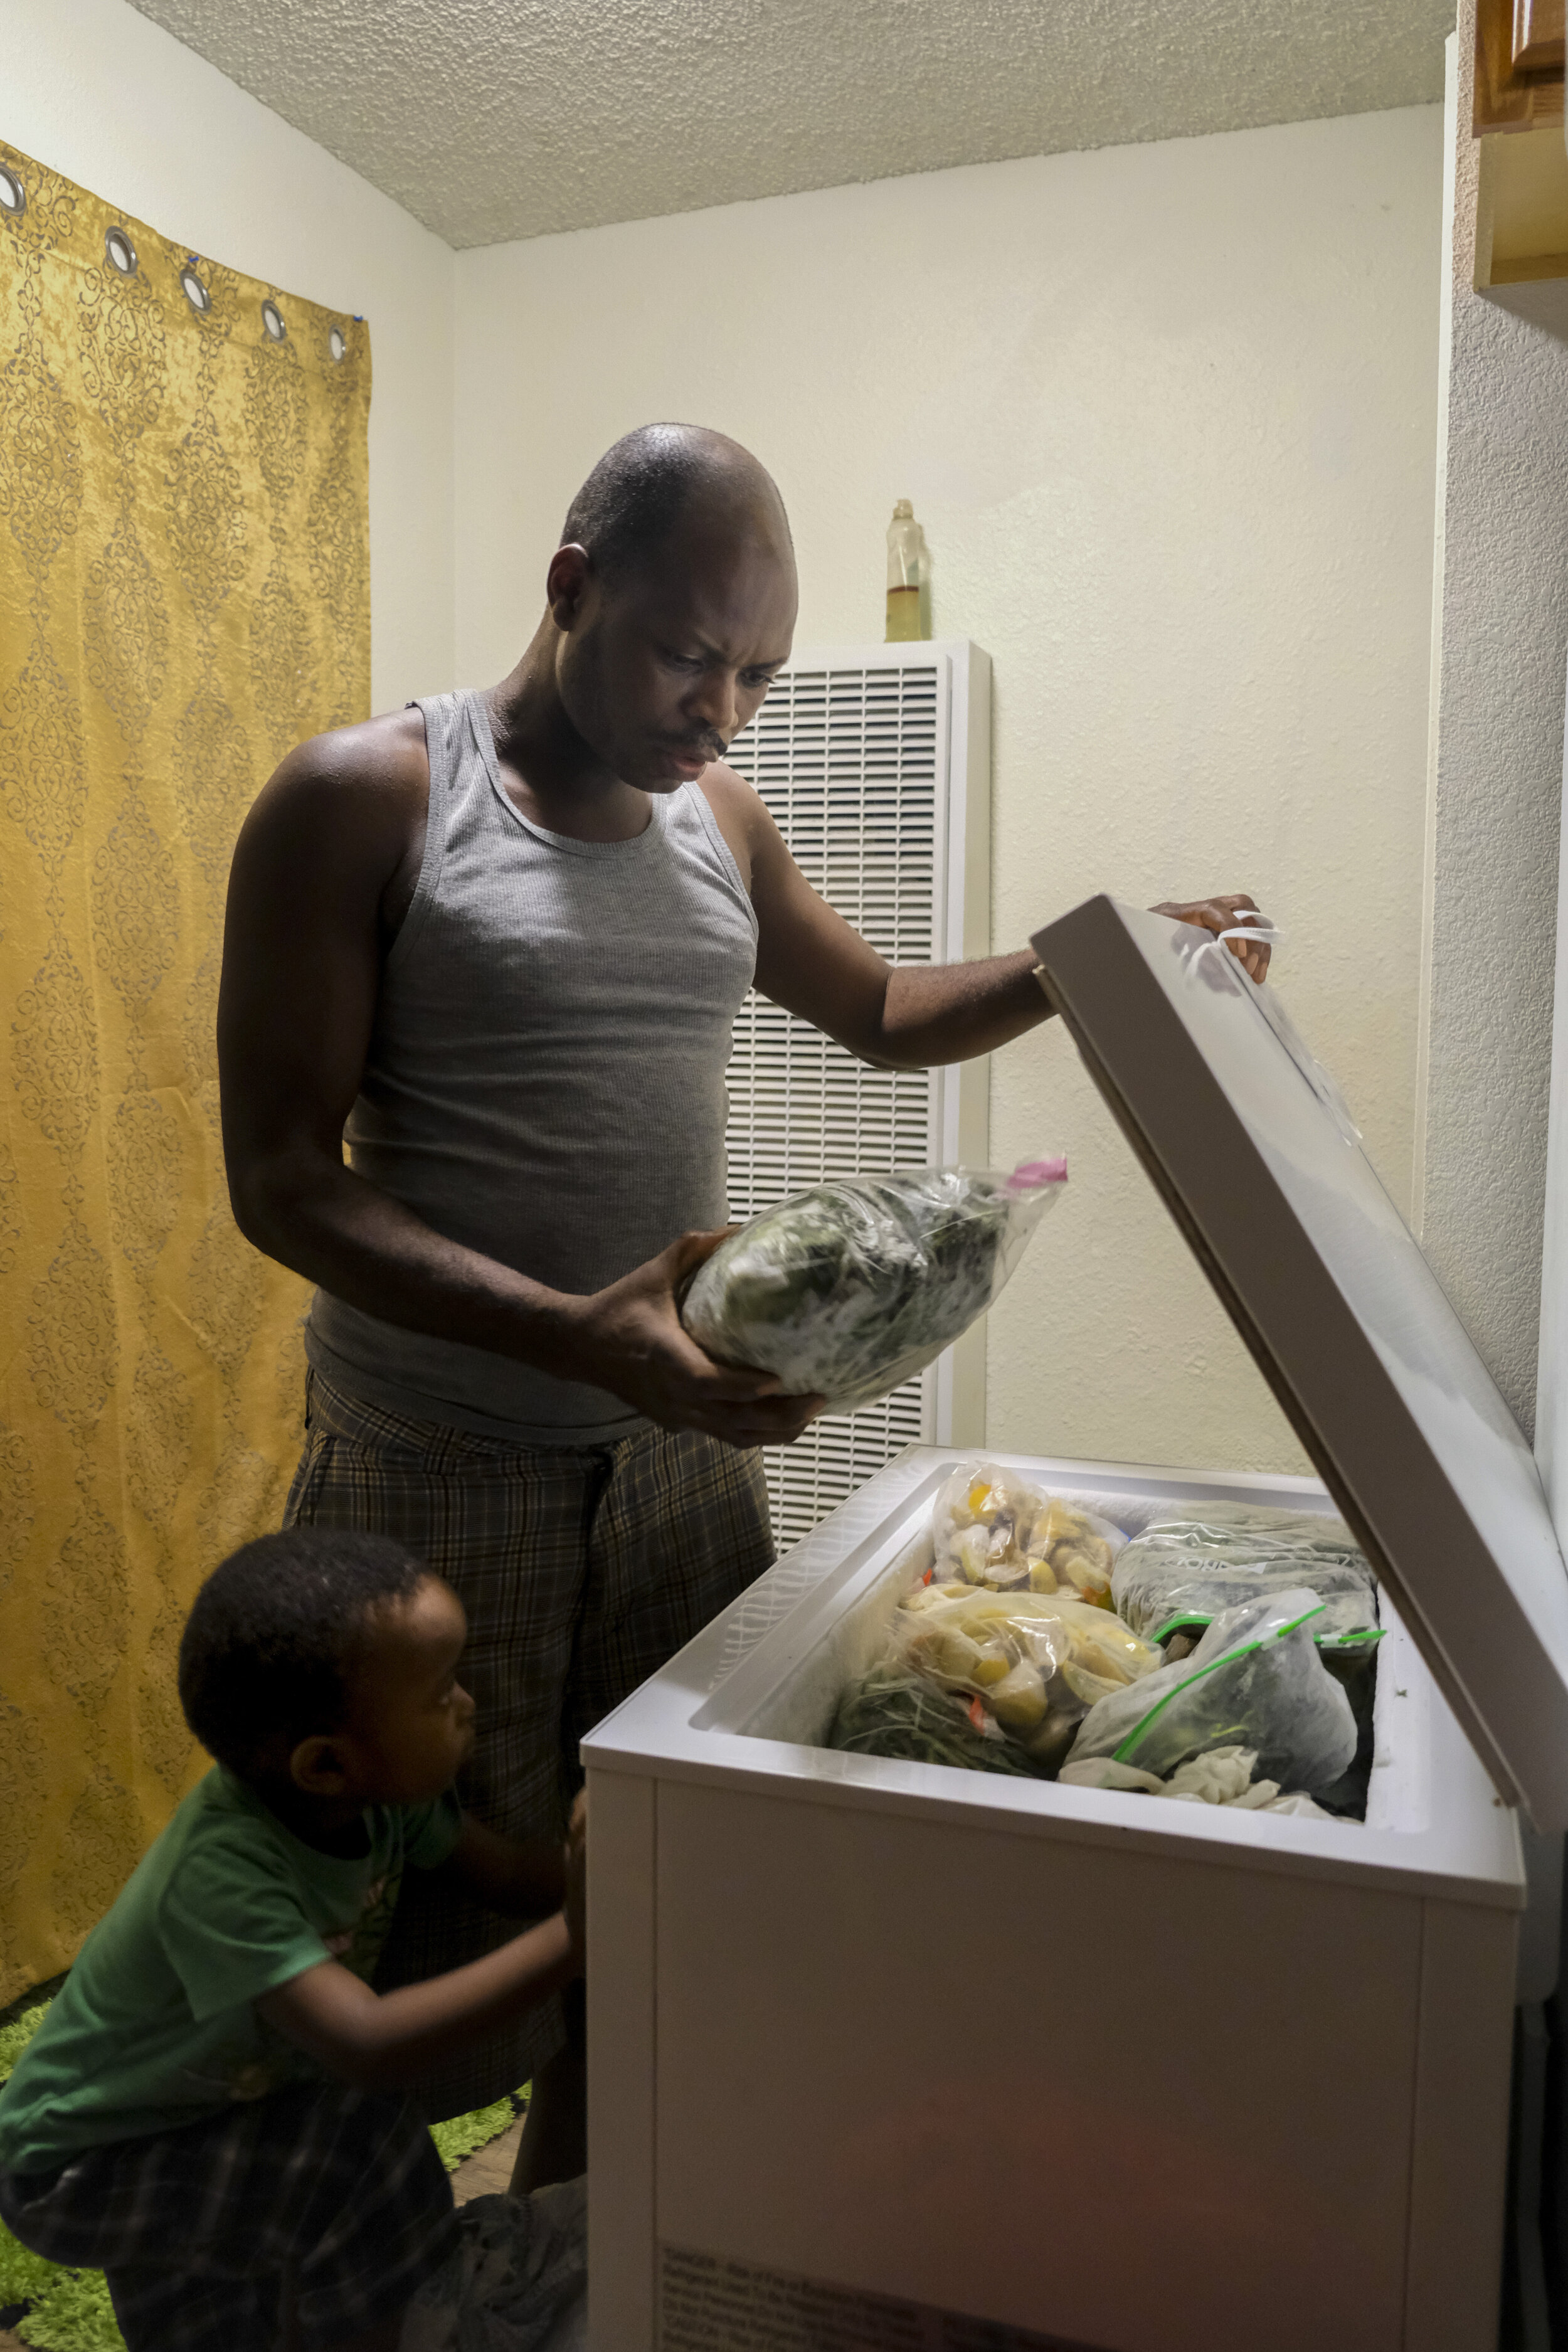  USA, San Diego, CA, October 27, 2020. Denis Sindayigaya, 3, watches his father Desire Ndayisenga, 40, select ingredients for dinner from the family’s storage freezer.&nbsp; After spending the day preparing food as a chef at BJ's Brewhouse, a restaur